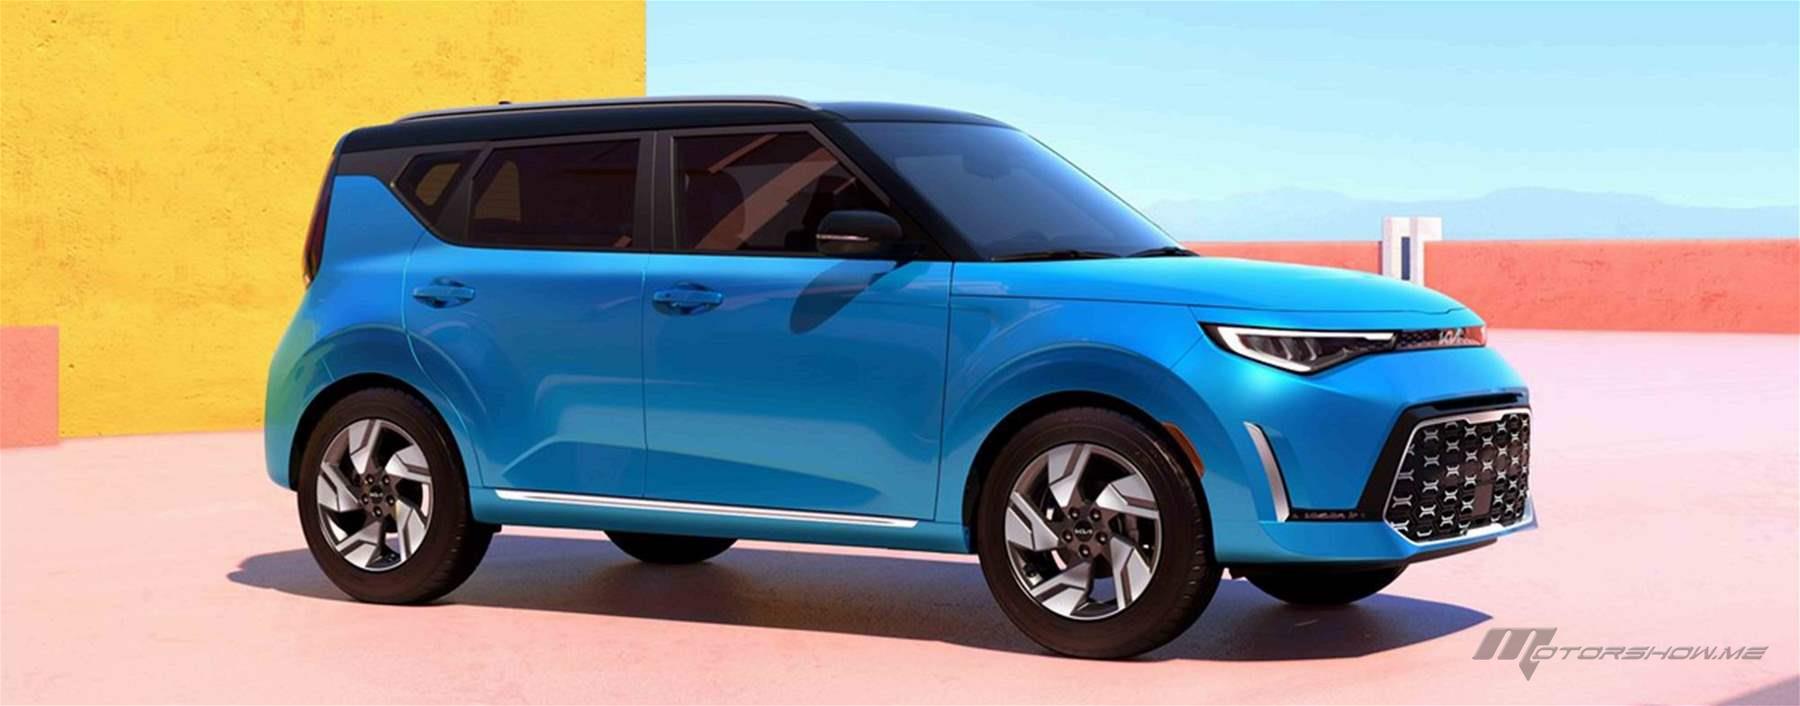 The 2023 Kia Soul Debuts with Refreshed Design Inside and Out